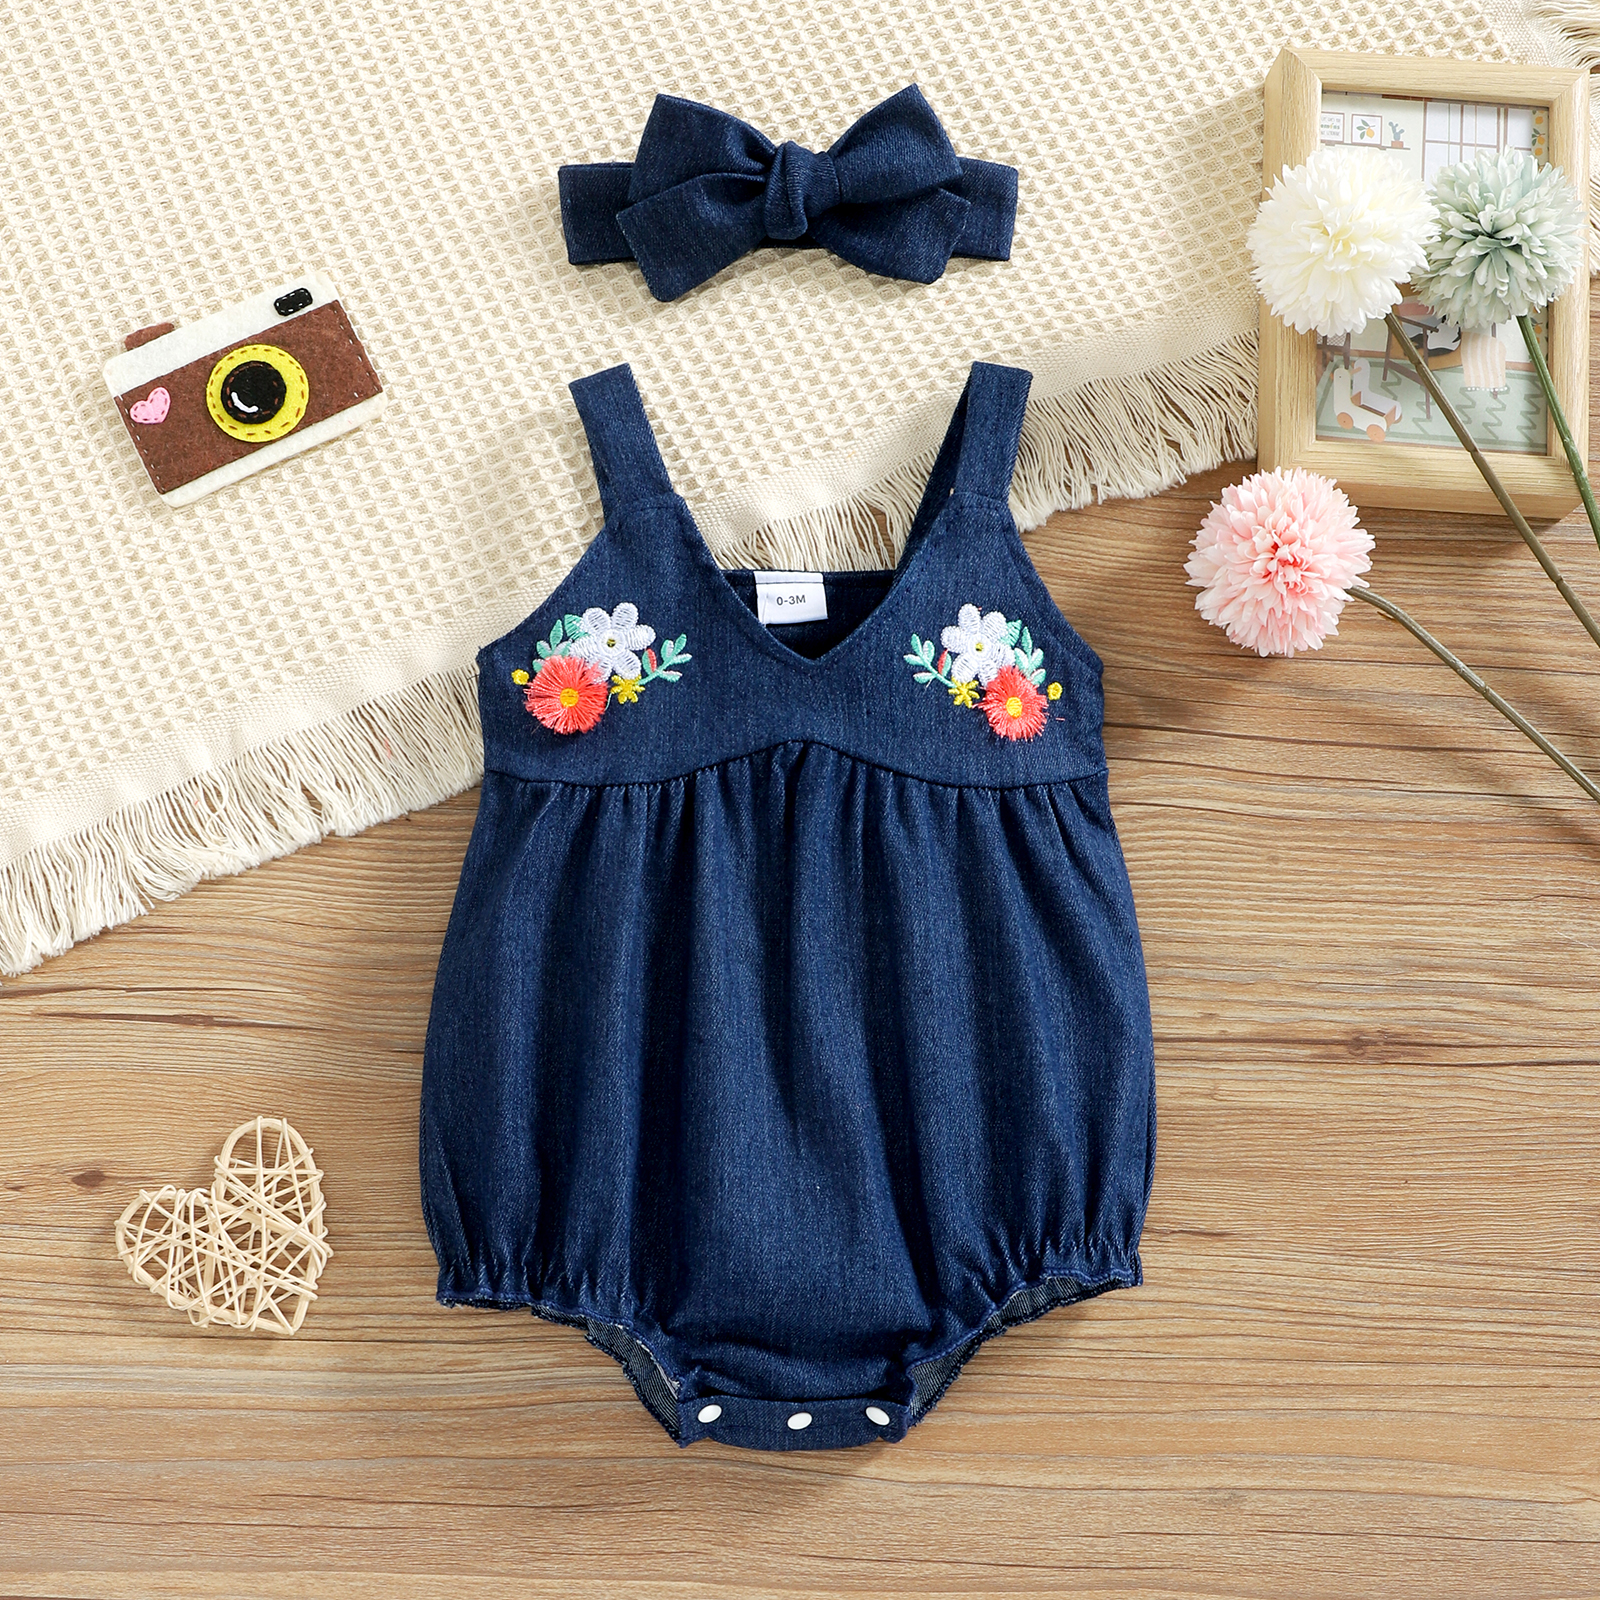 100% cotton denim 2pcs baby girl floral embroidered sleeveless romper with headband set